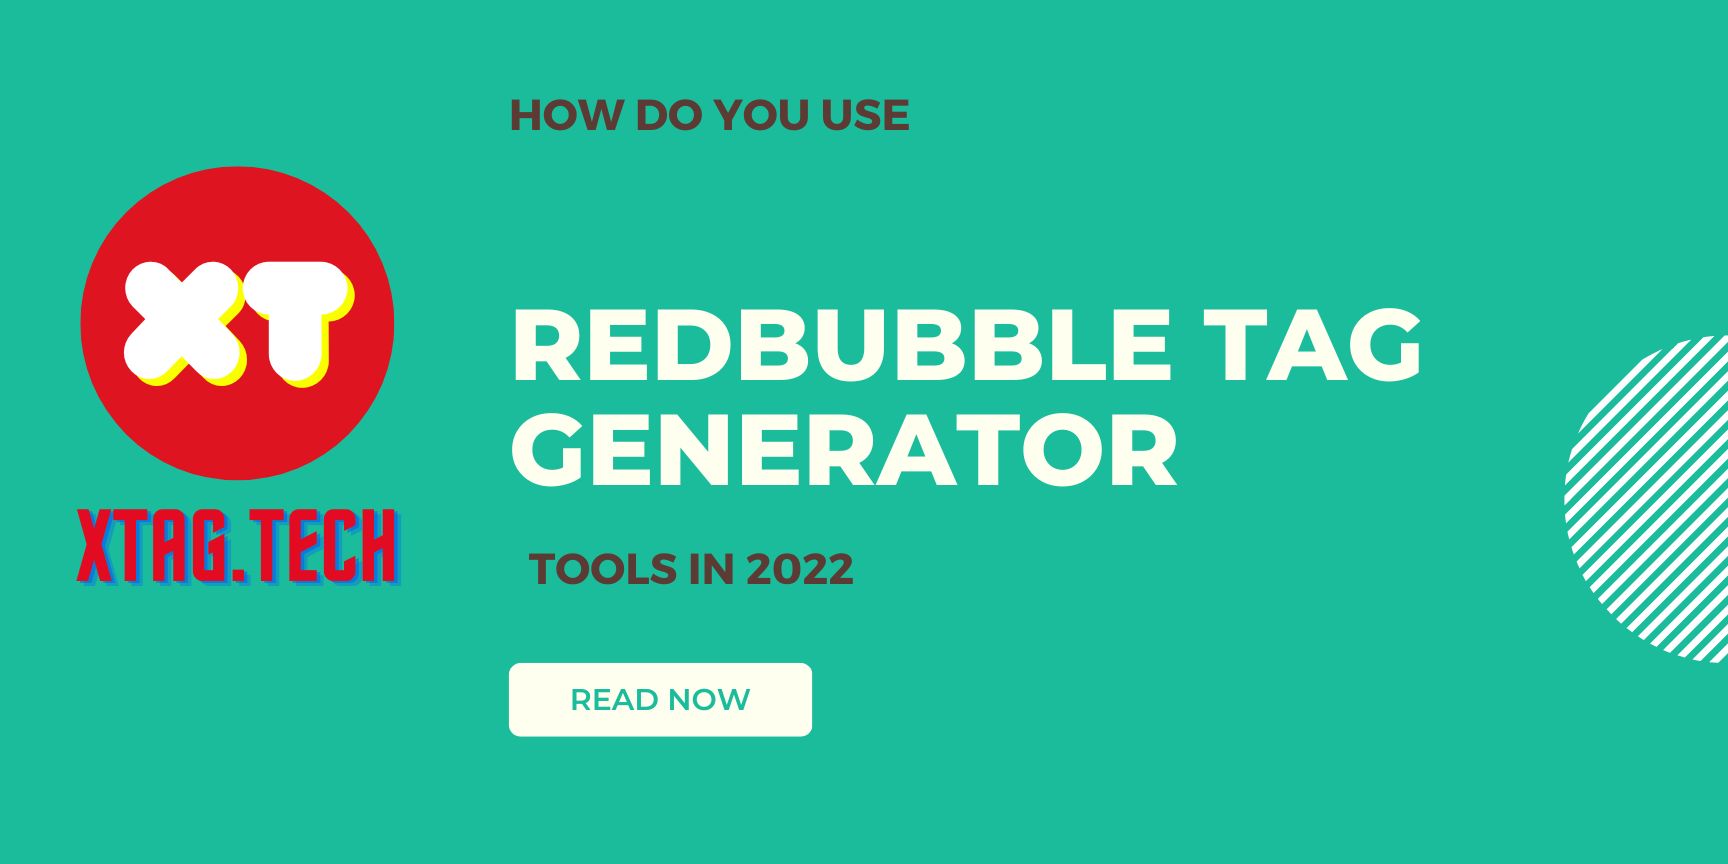 How Do You Use Redbubble Tag Generator in 2022